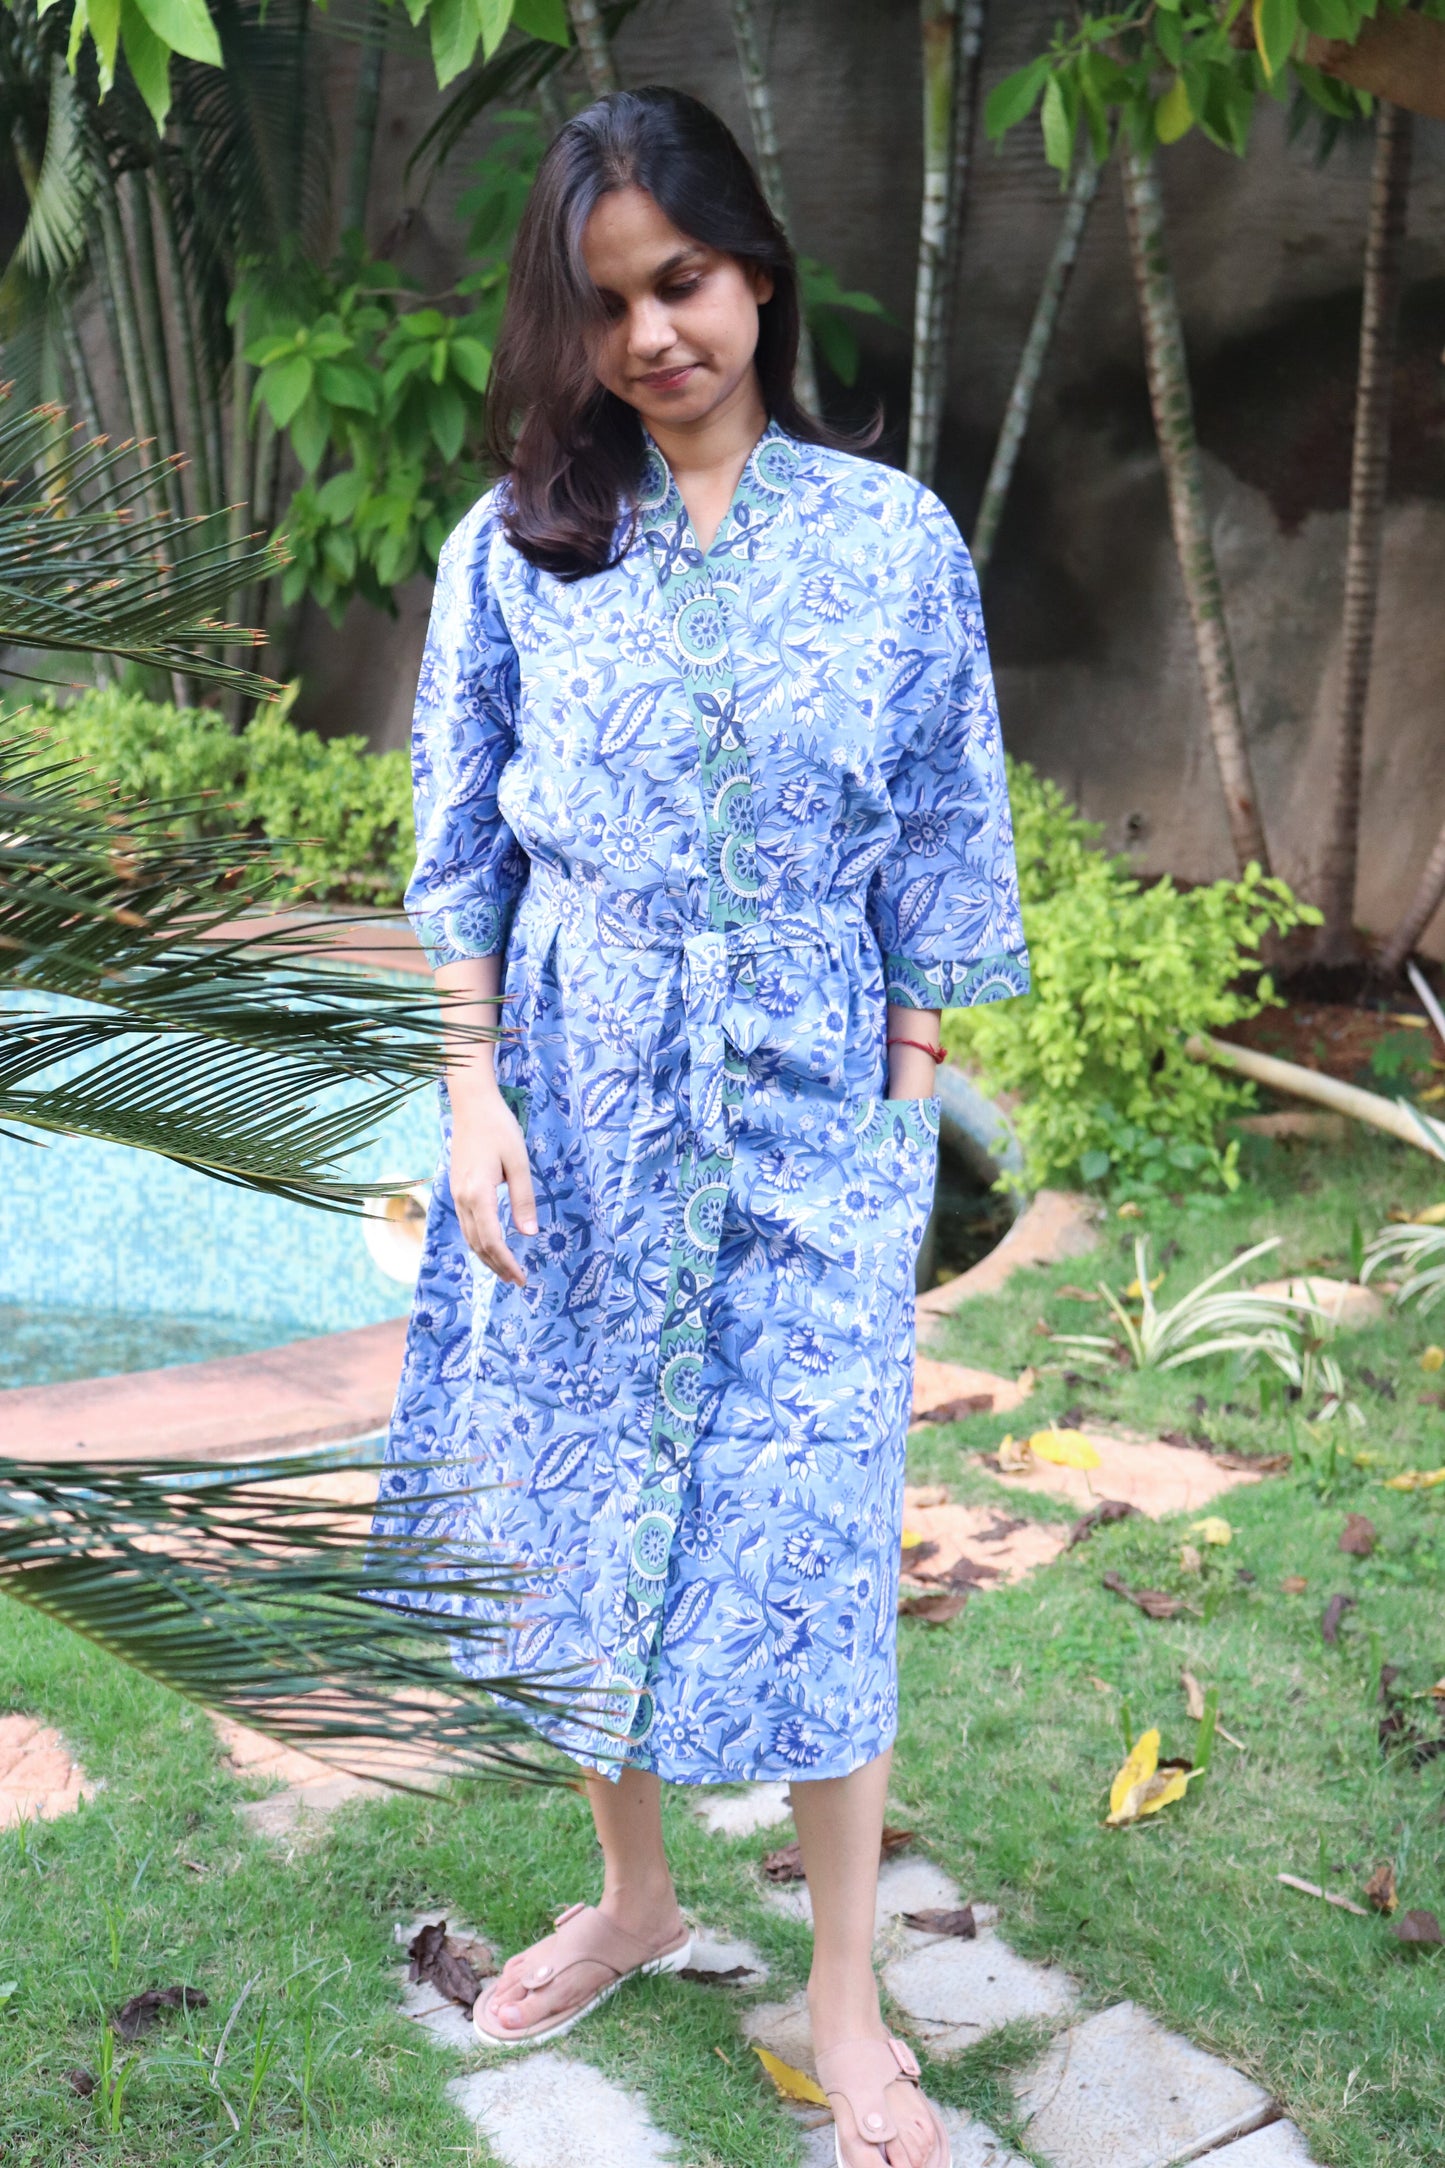 Blue floral Cotton robe for women - Block print robes - beach cover up - Blue floral